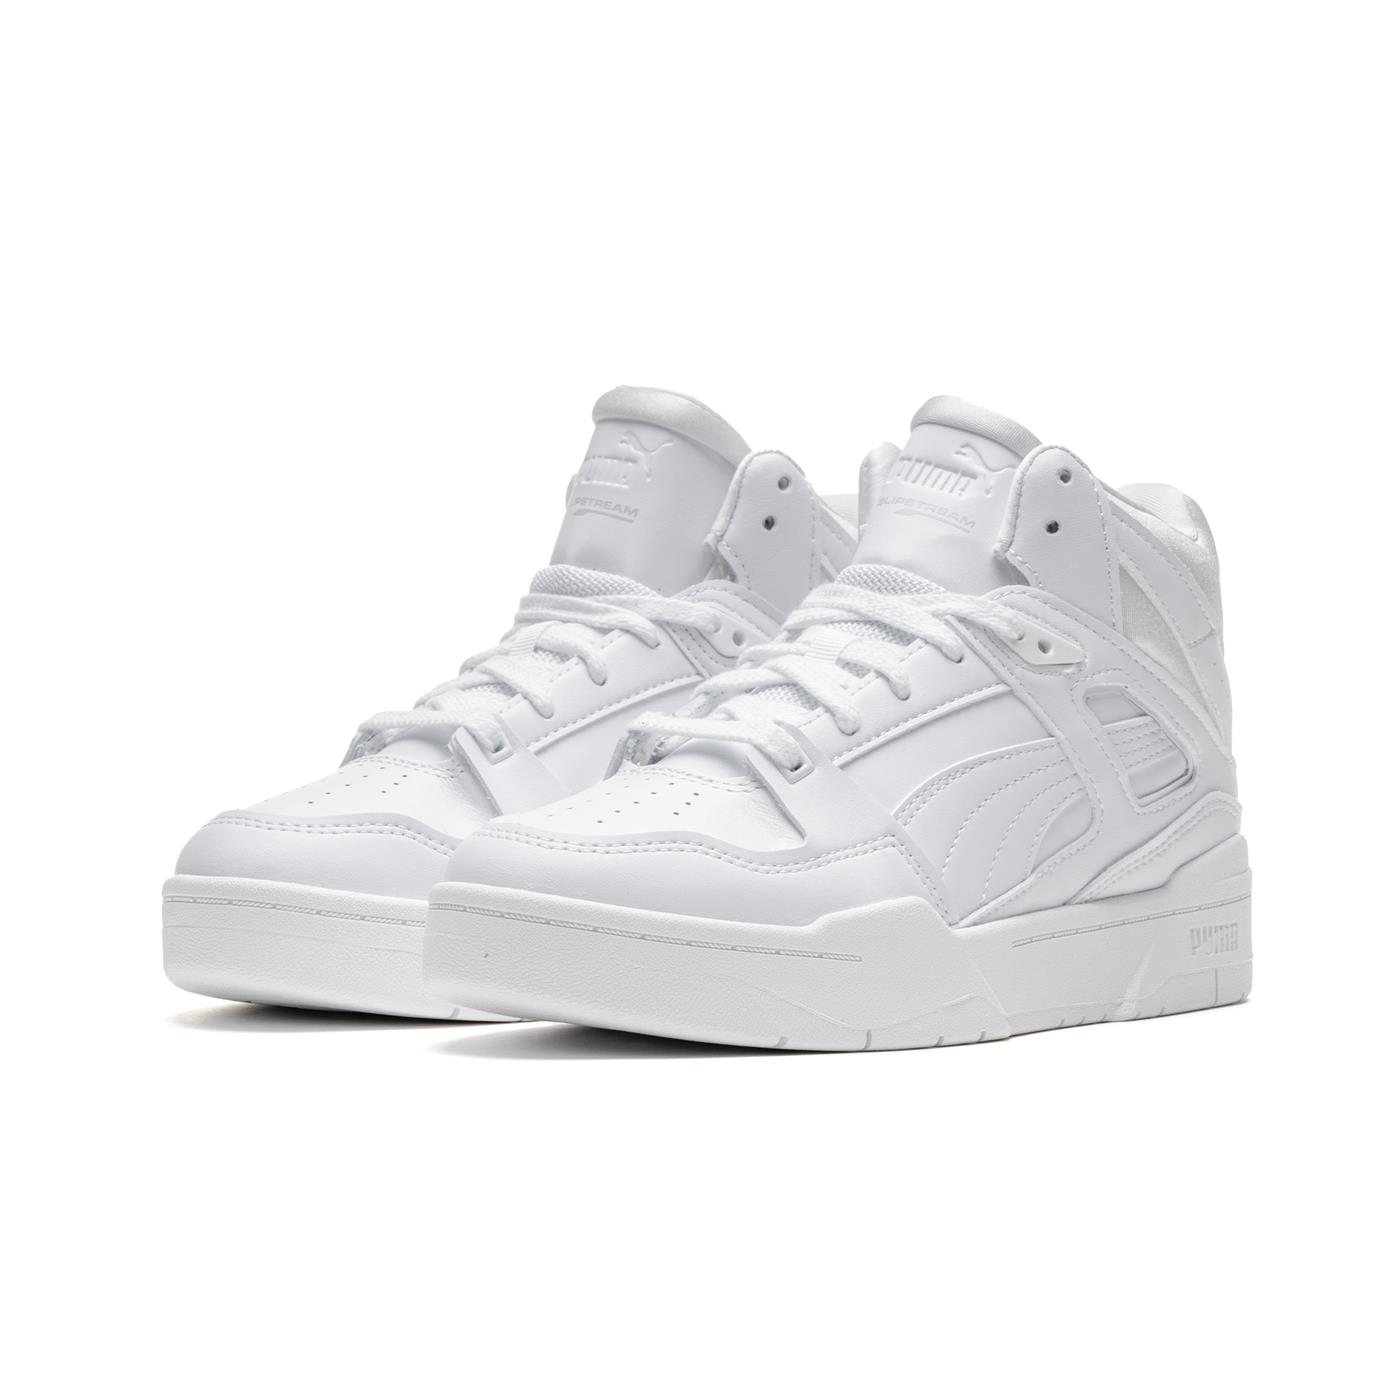 Sneakers PUMA Slipstream Hi Wns White for Woman | 38656502 | XTREME.PT